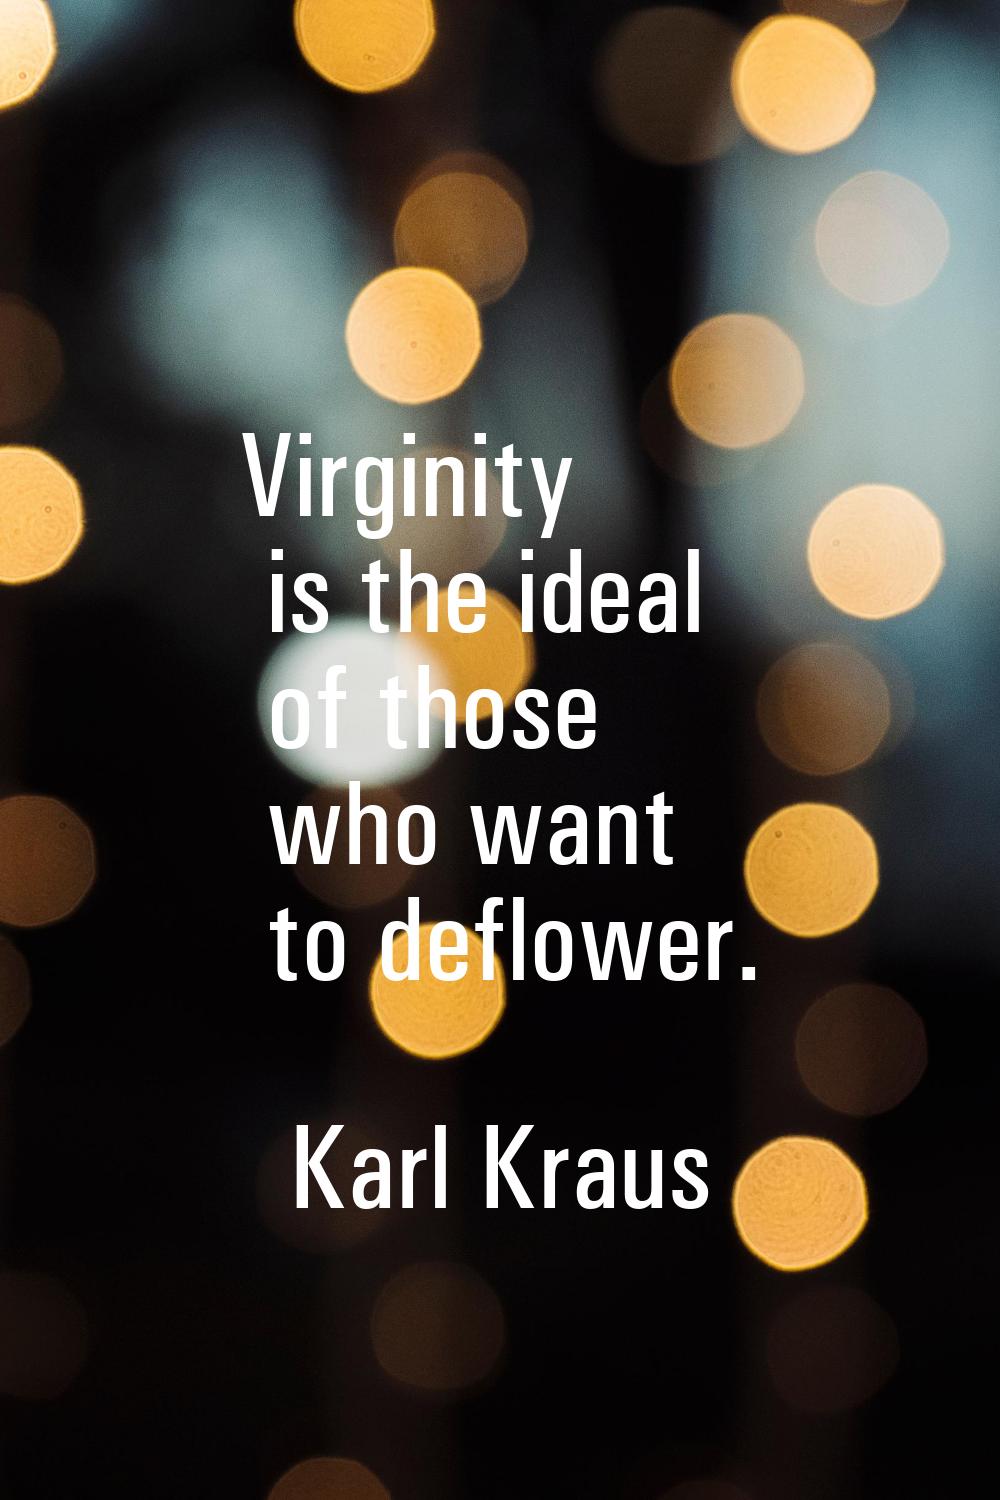 Virginity is the ideal of those who want to deflower.